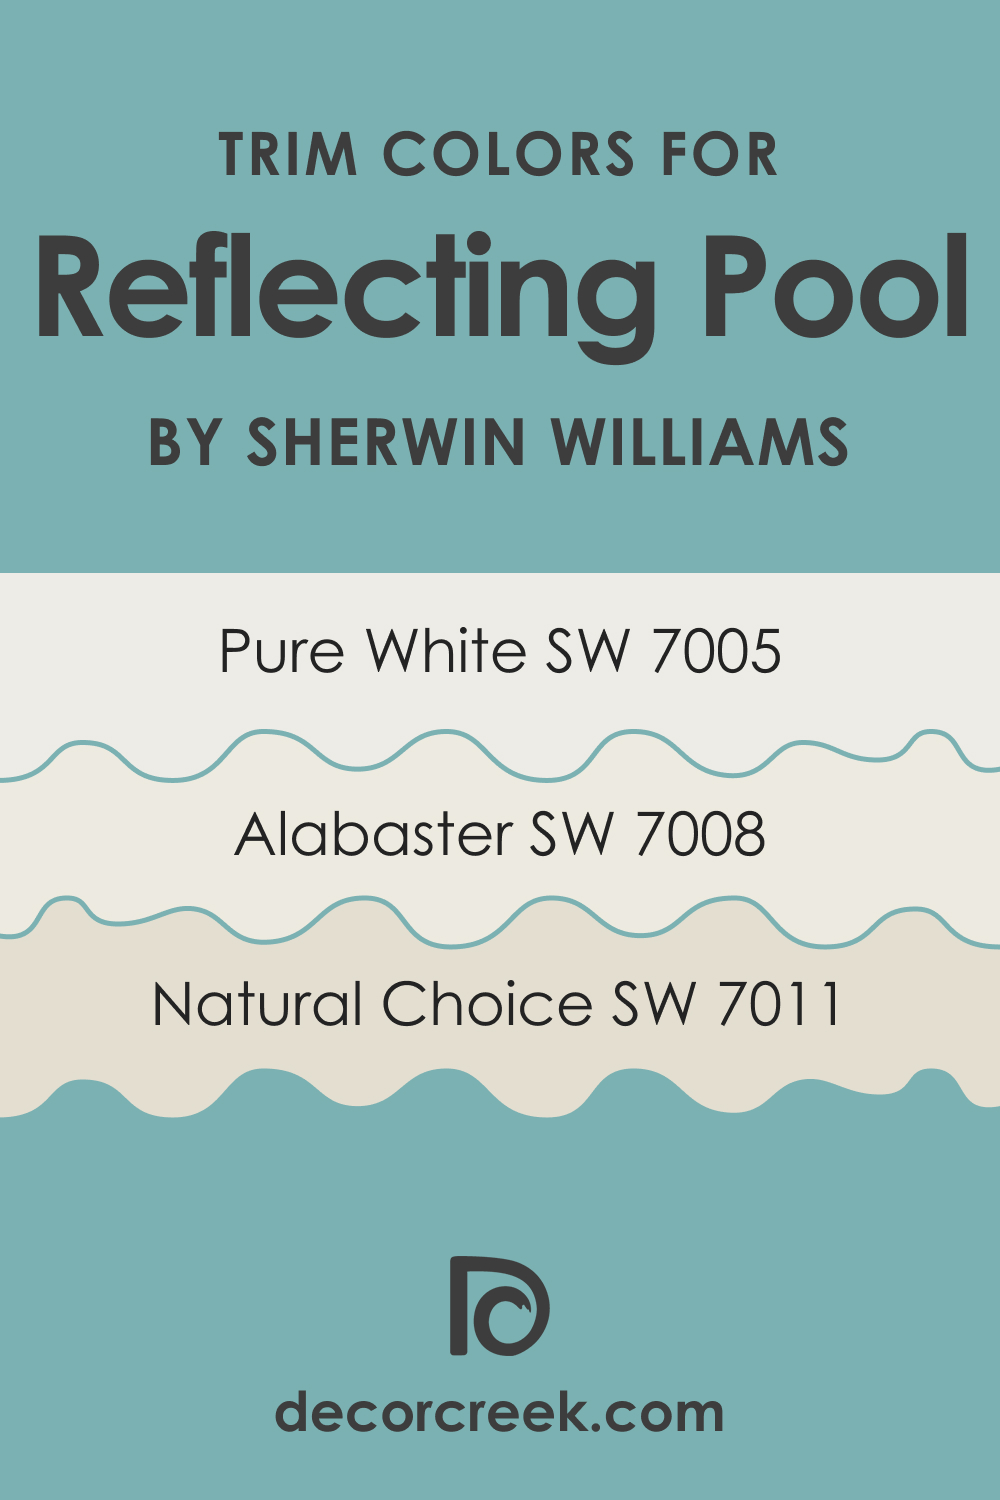 Trim Colors of SW 6486 Reflecting Pool